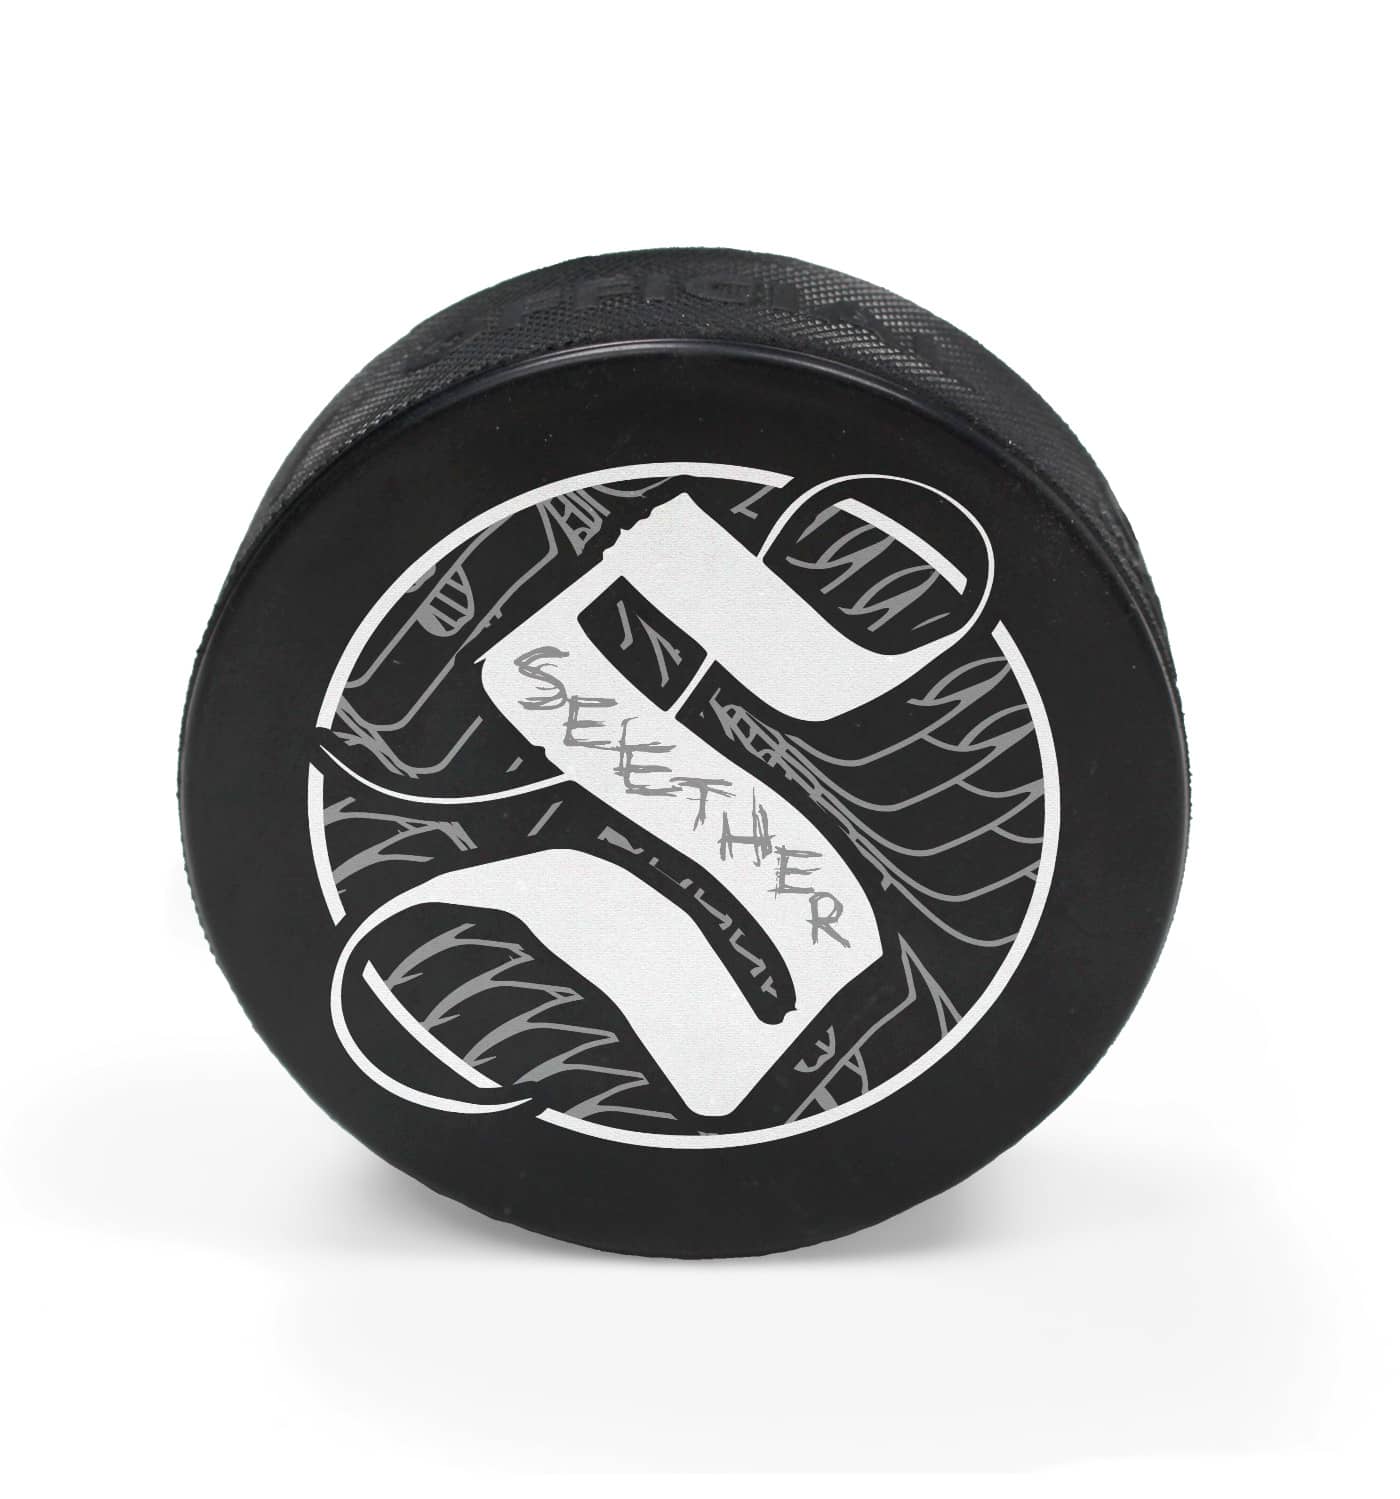 SEETHER 'THE S' limited edition hockey puck front view